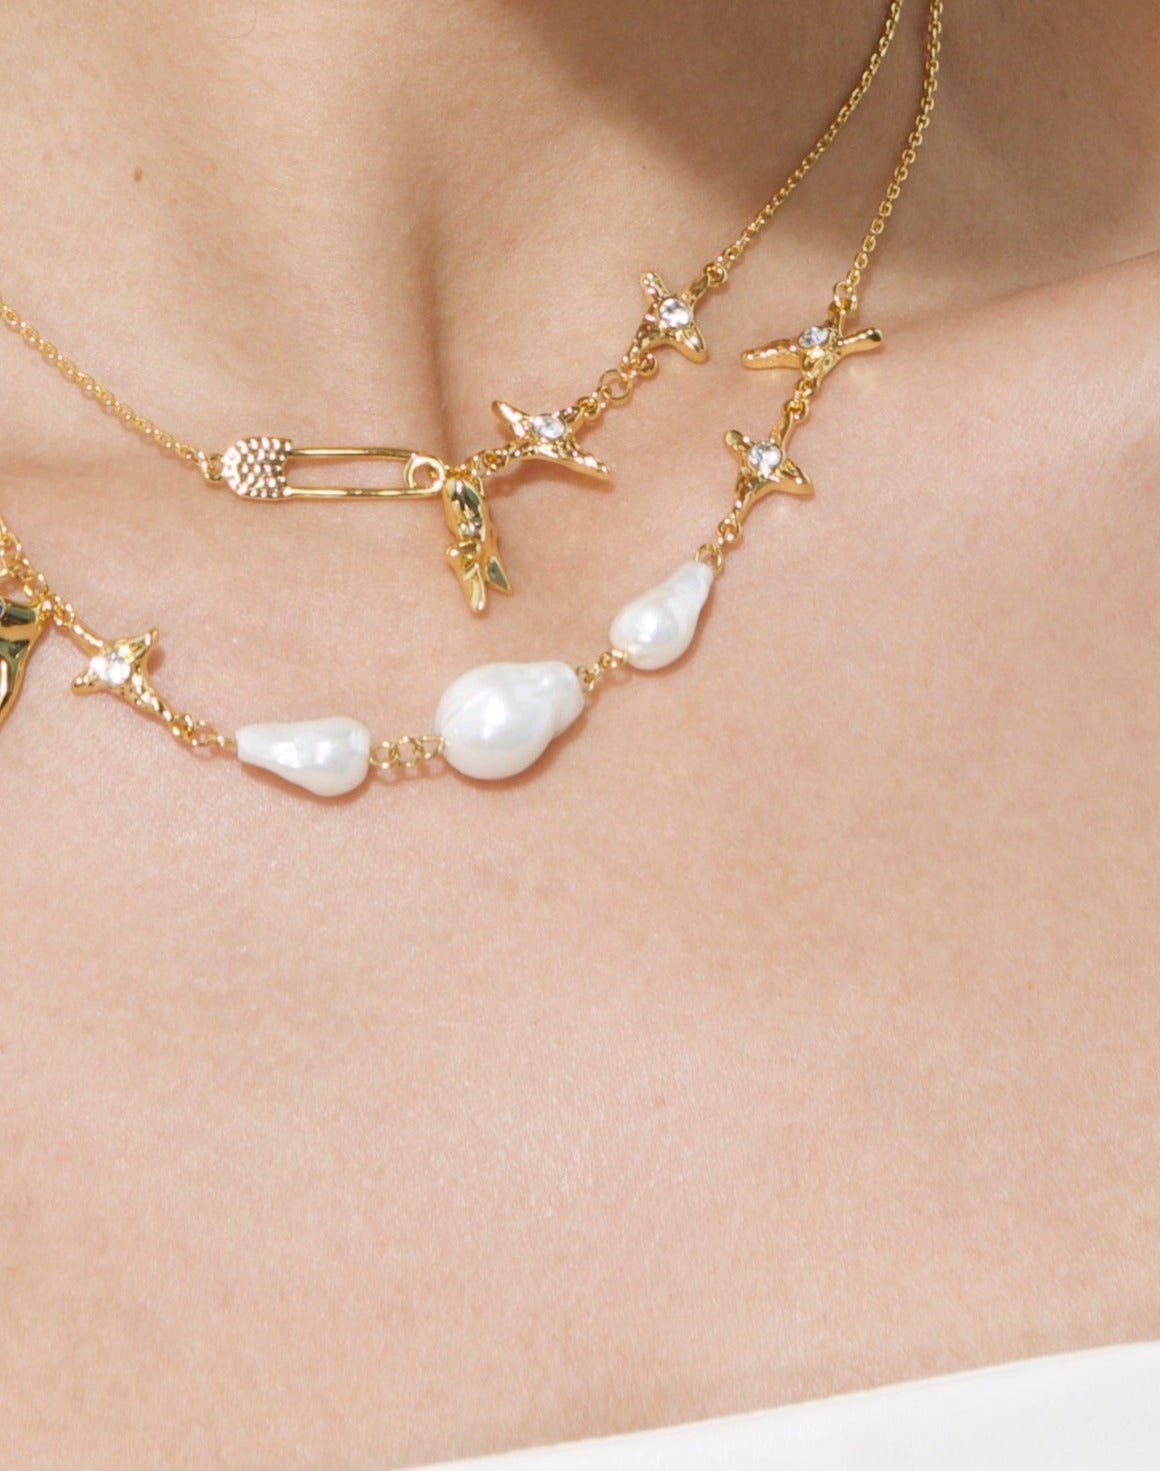 The Mellow Necklace in gold